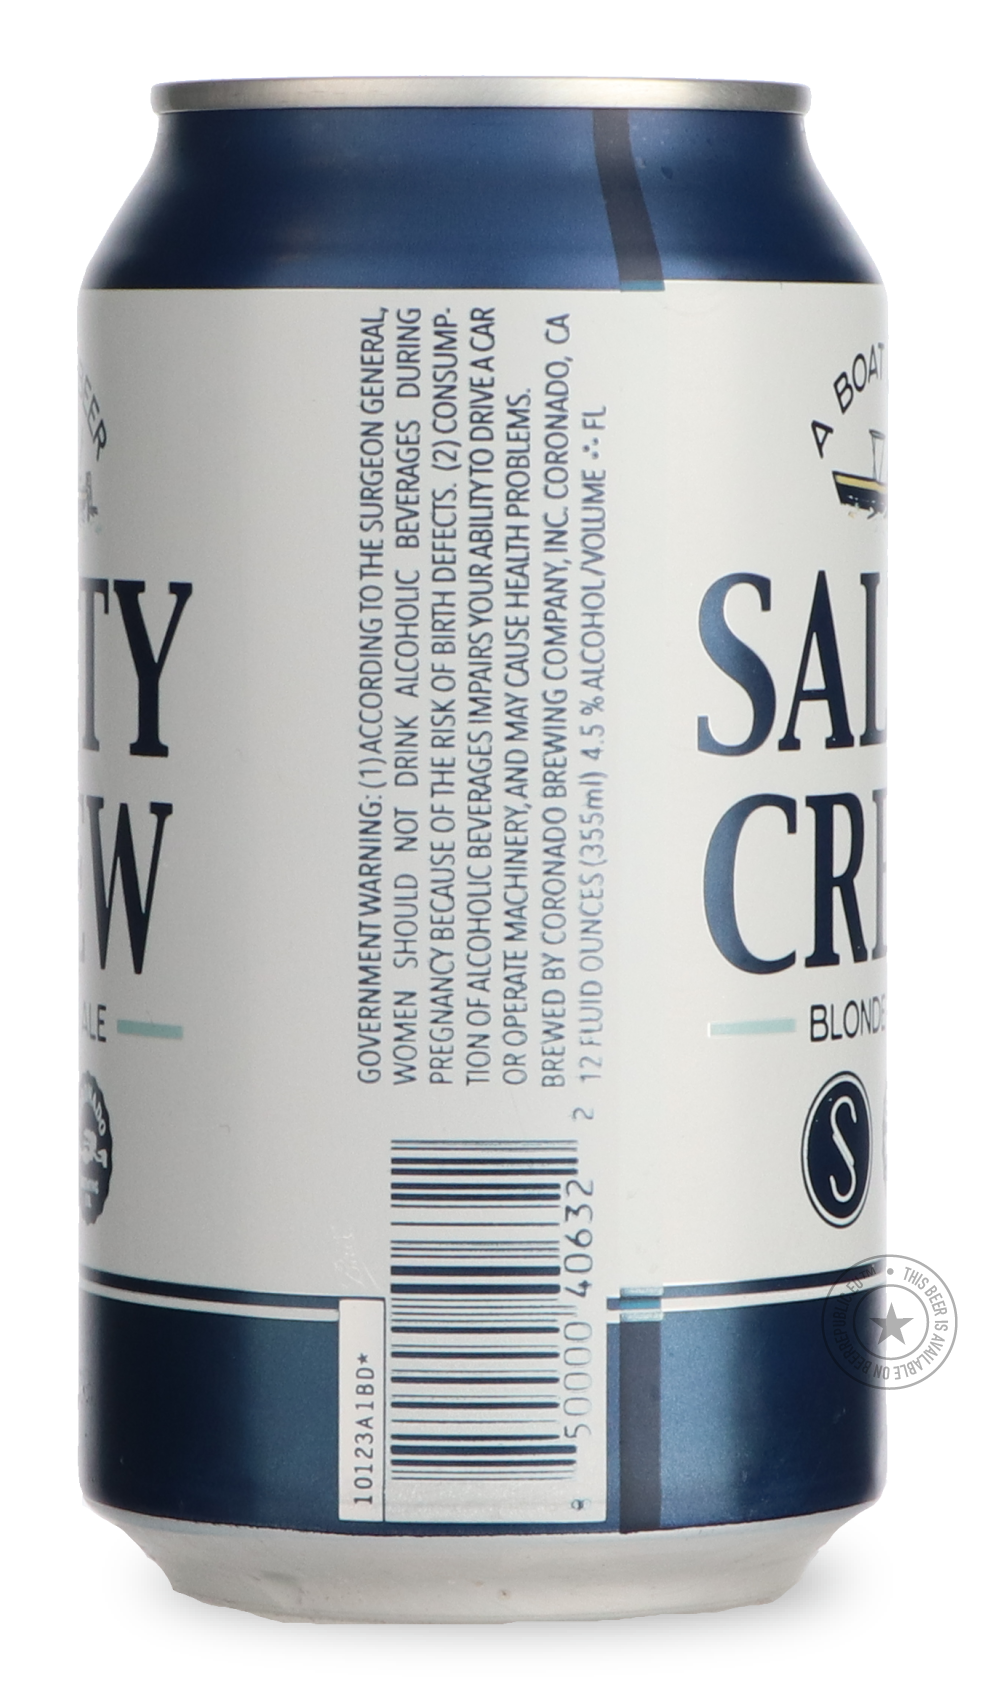 -Coronado- Salty Crew-Pale- Only @ Beer Republic - The best online beer store for American & Canadian craft beer - Buy beer online from the USA and Canada - Bier online kopen - Amerikaans bier kopen - Craft beer store - Craft beer kopen - Amerikanisch bier kaufen - Bier online kaufen - Acheter biere online - IPA - Stout - Porter - New England IPA - Hazy IPA - Imperial Stout - Barrel Aged - Barrel Aged Imperial Stout - Brown - Dark beer - Blond - Blonde - Pilsner - Lager - Wheat - Weizen - Amber - Barley Win